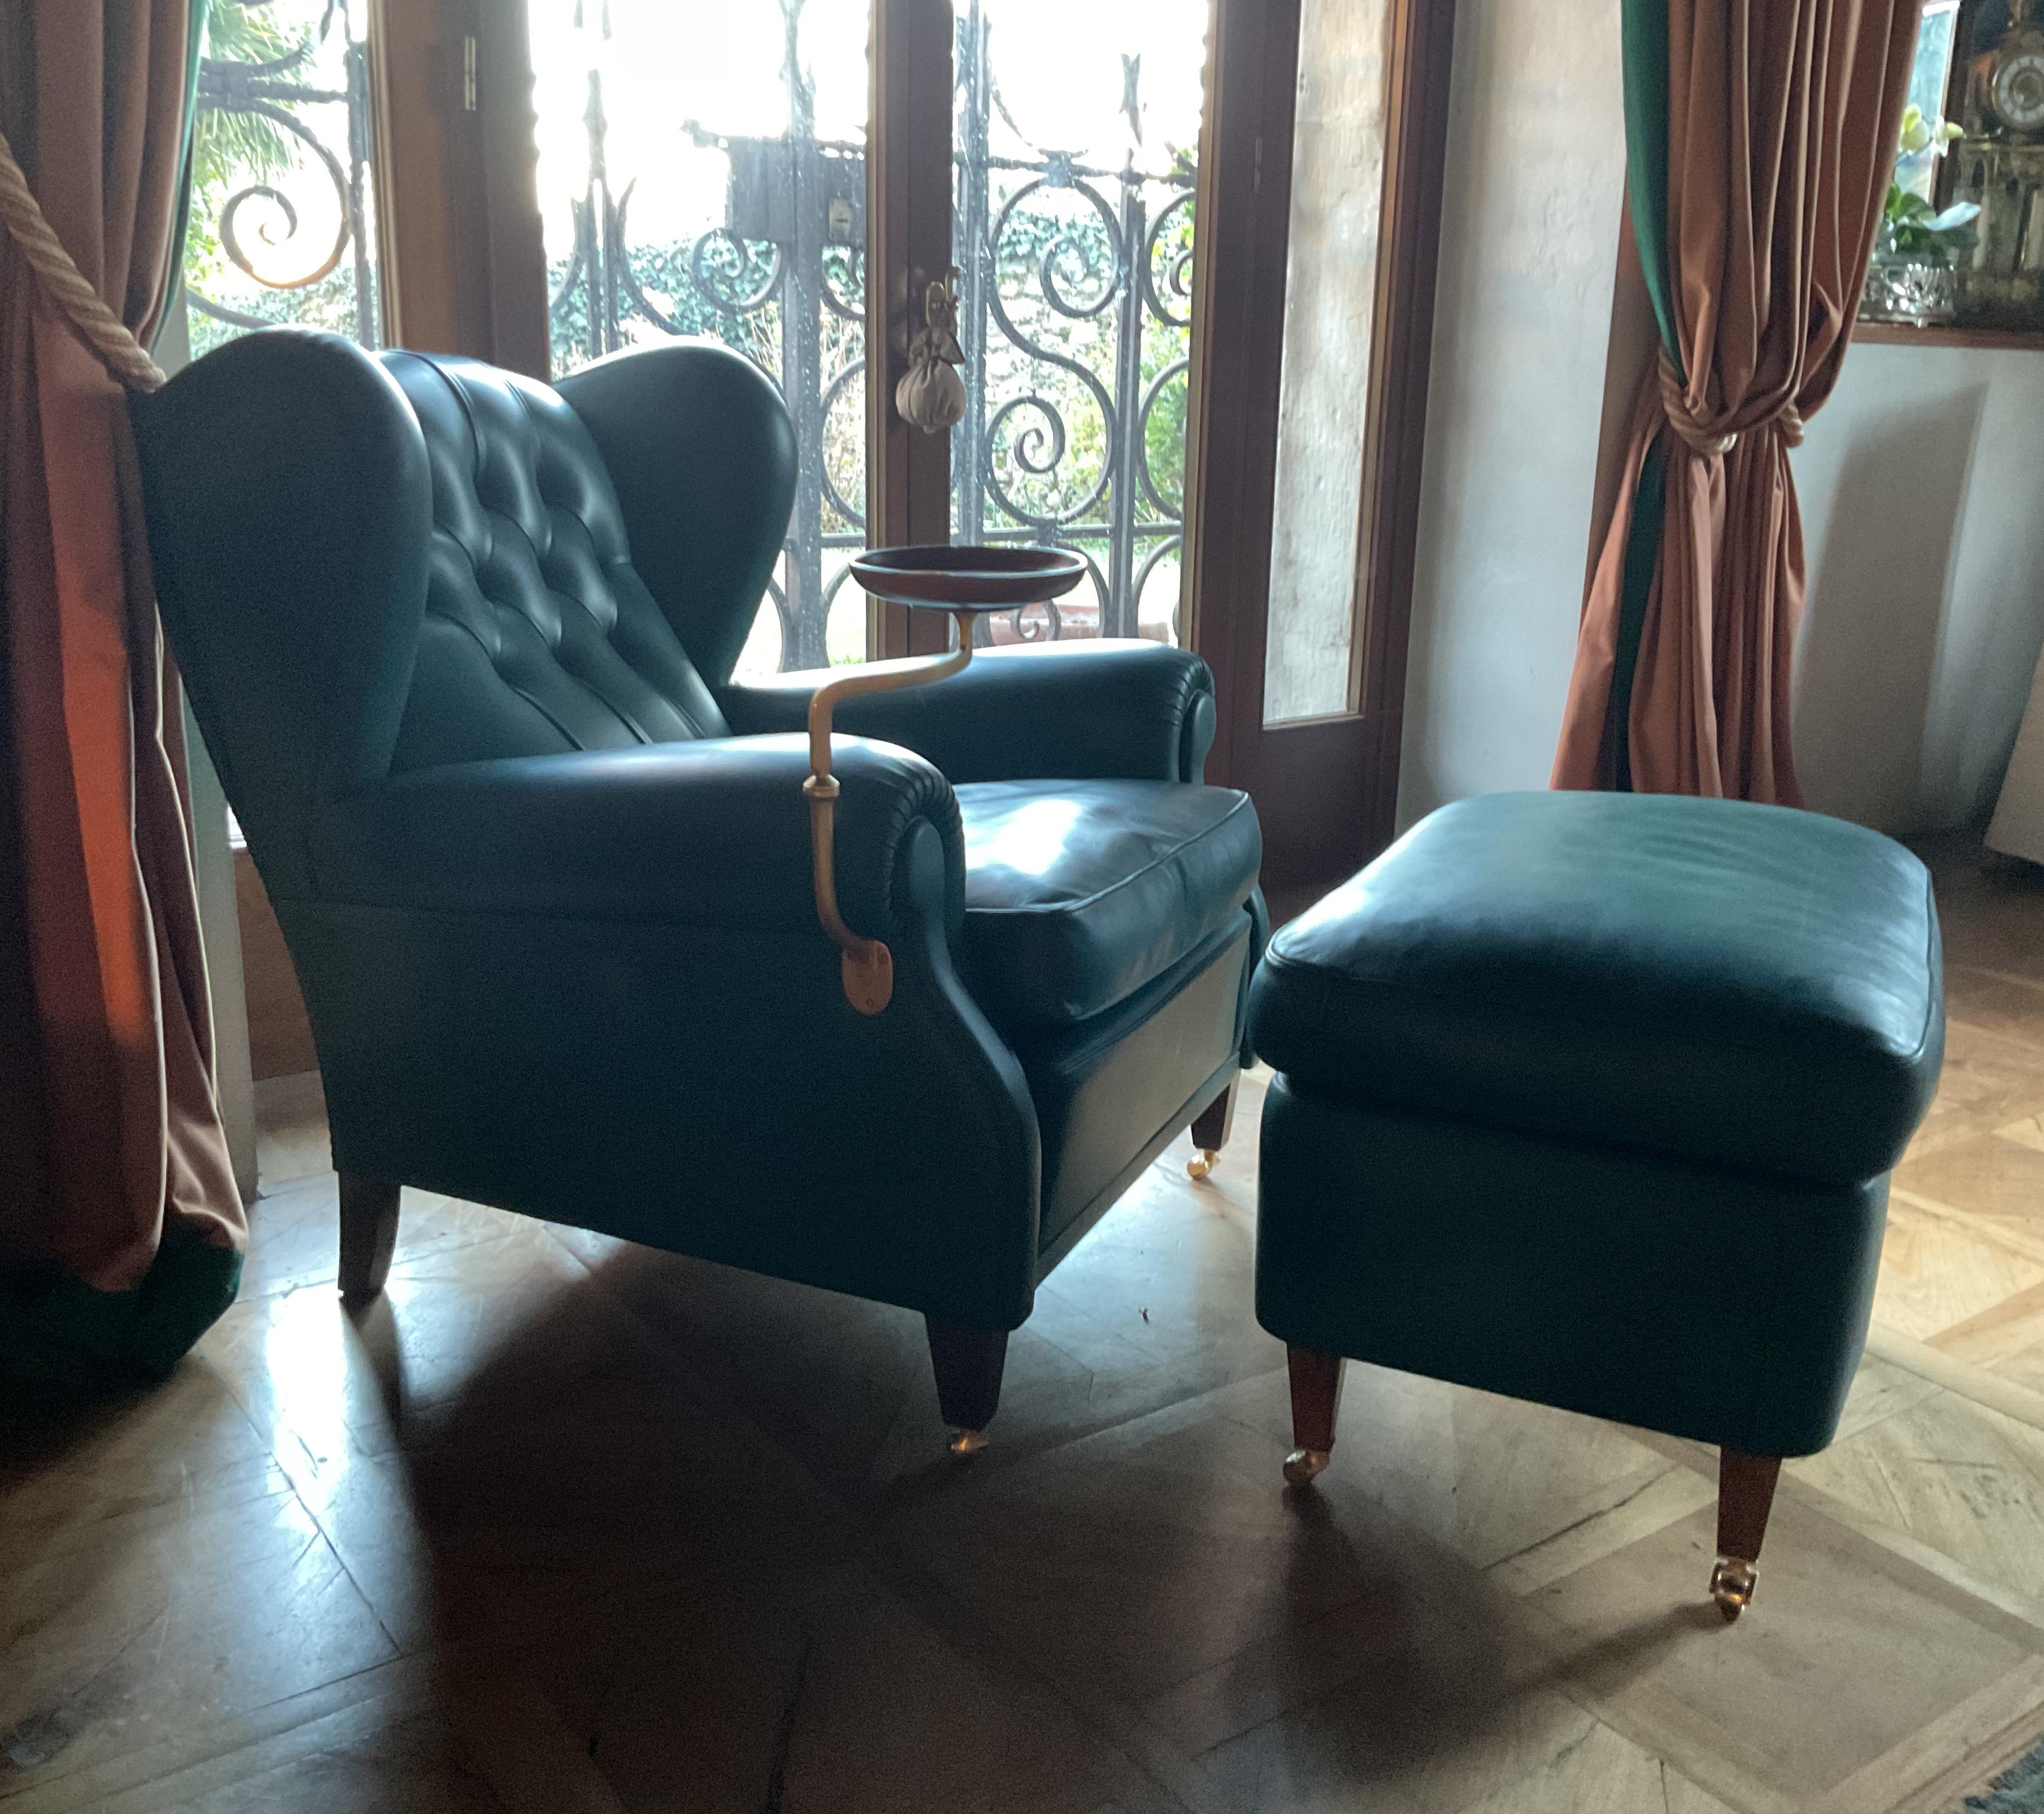 Frau armchair with ottoman model 1919

1919, by Poltrona Frau, is a historical armchair inspired by the model 128, which entered Renzo Frau's catalog beginning in 1919 and echoed the opulent features of Rococo bergère. Upholstered and fully